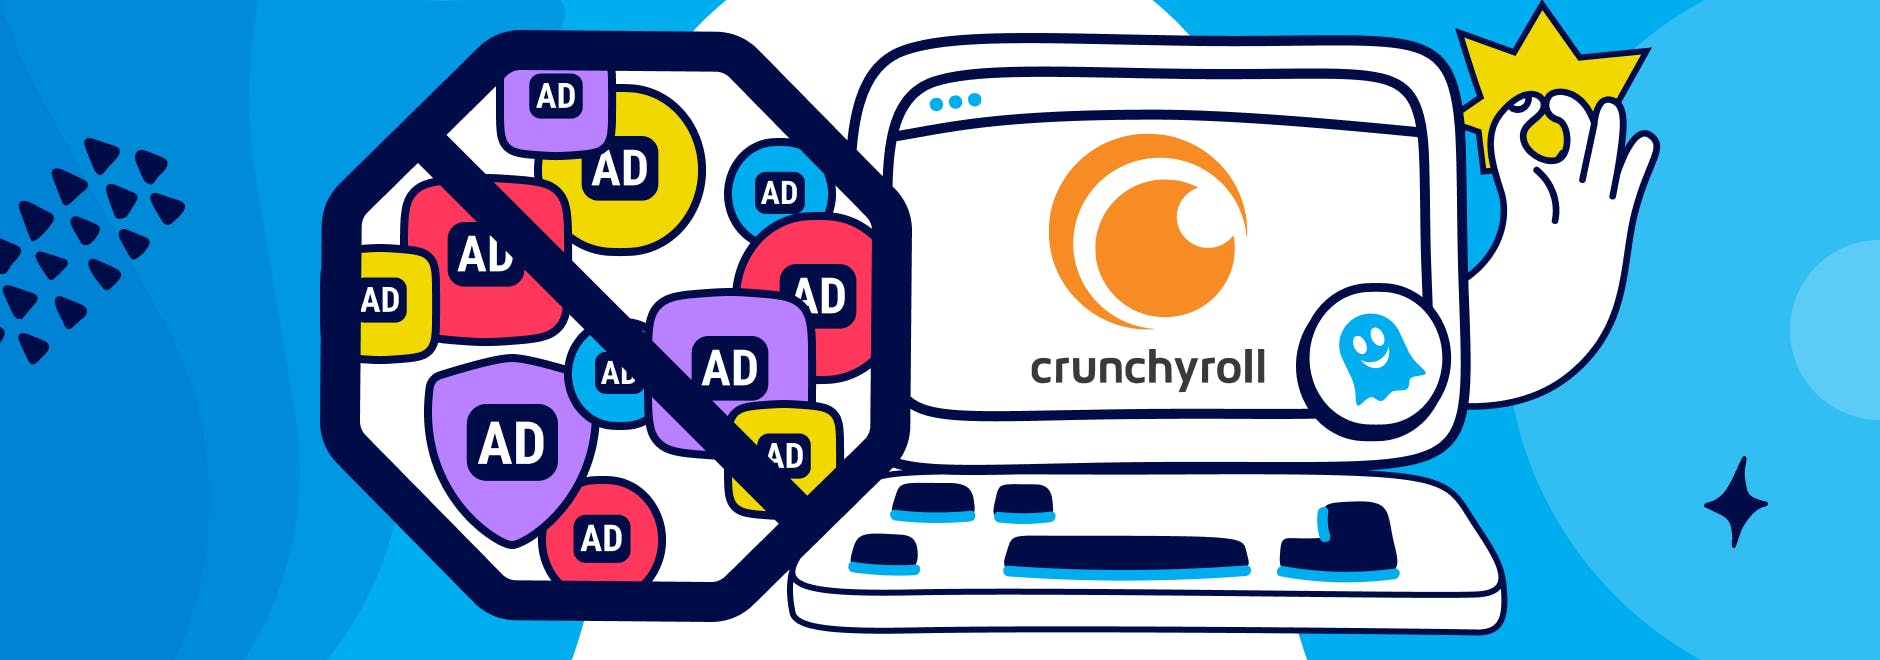 Ghostery: The Ad Blocker That Works on Crunchyroll